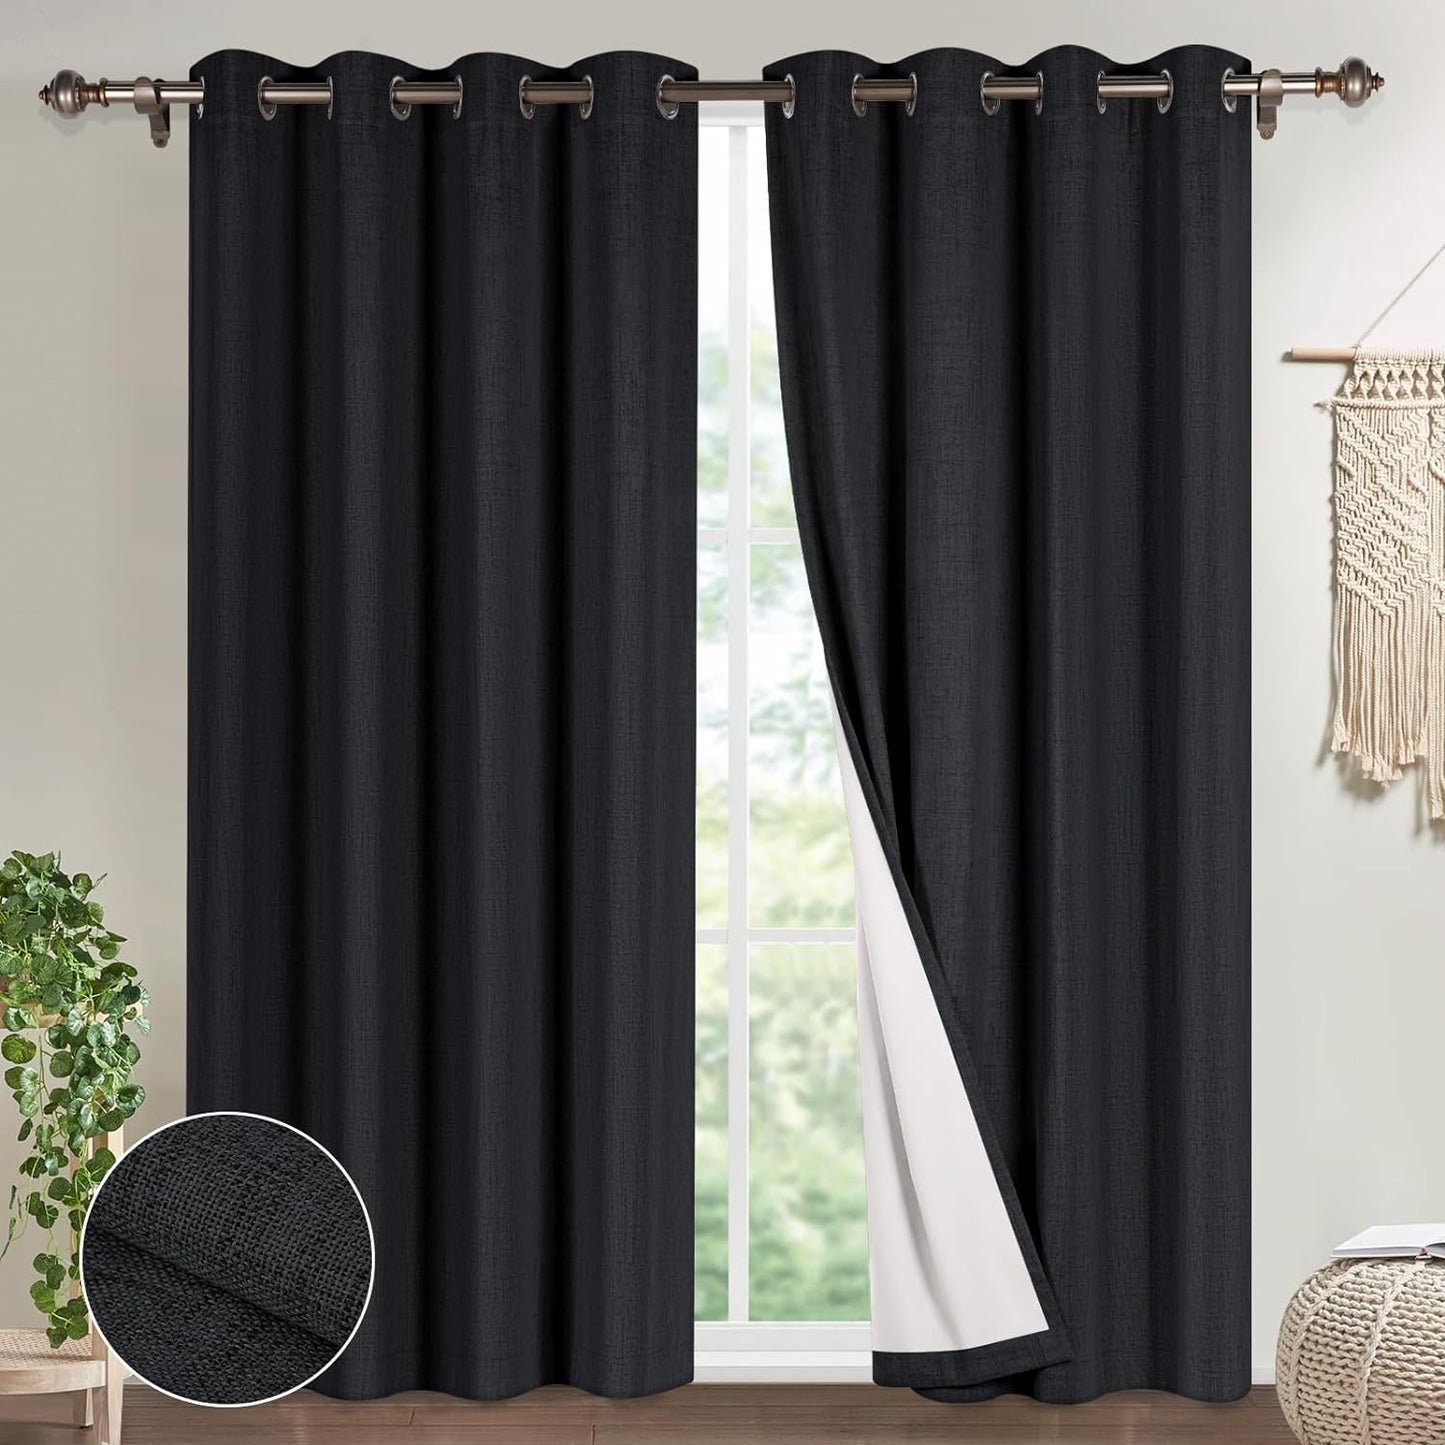 Timeles 100% Blackout Window Curtains 84 Inch Length for Living Room Textured Linen Curtains Sliver Grommet Pinch Pleated Room Darkening Curtain with White Liner/Ties(2 Panel W52 X L84, Ivory)  Timeles Black W52" X L82" 